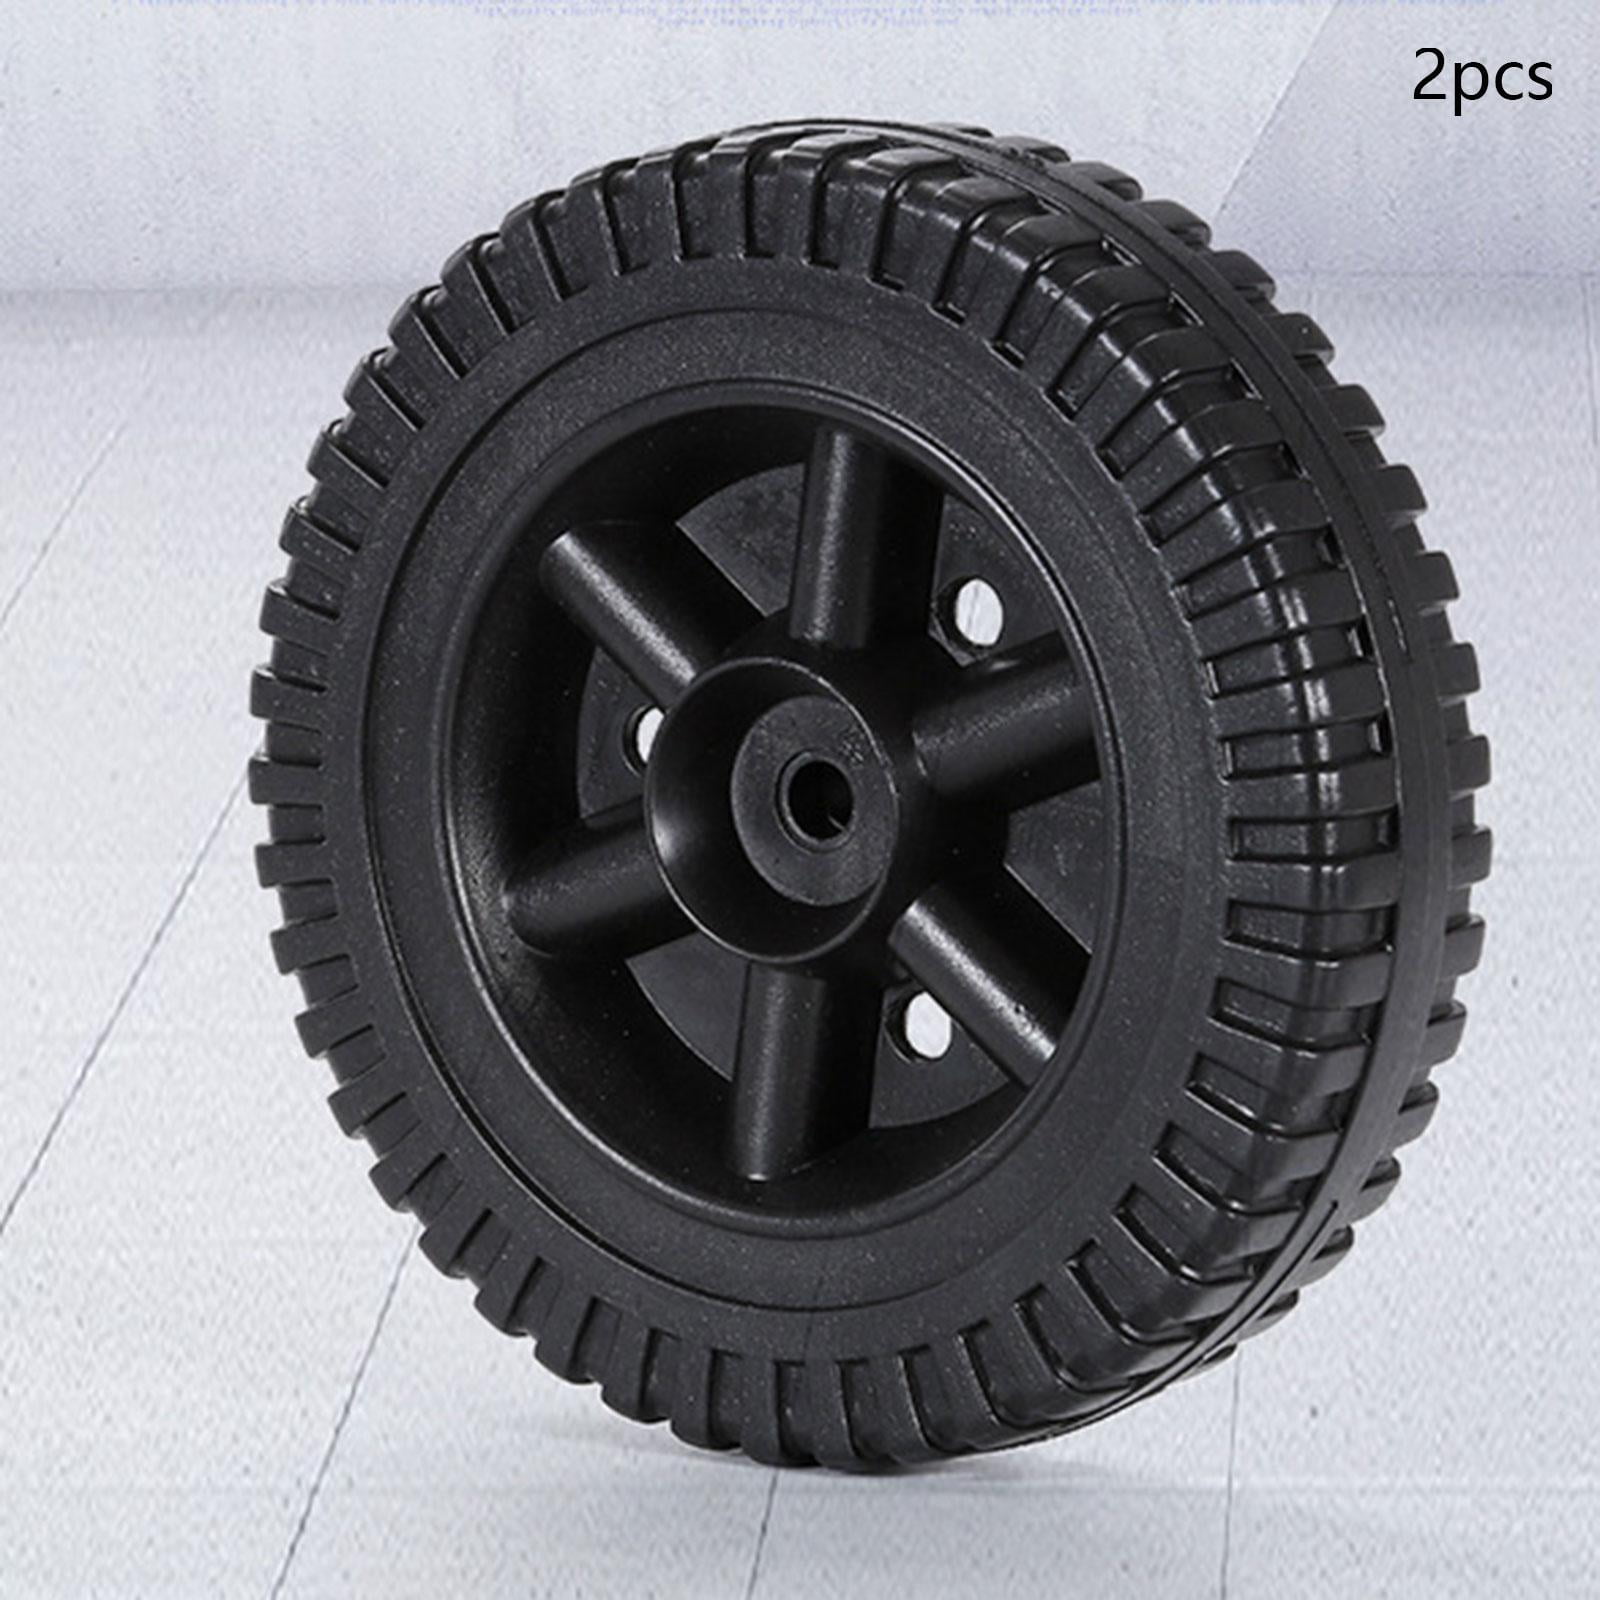 2Pcs BBQ Grill Wheel Replacement 6 inch Wheelbarrow Easy to Install Durable  Universal Wheel Hand Truck Tires for Garden Parts Style C